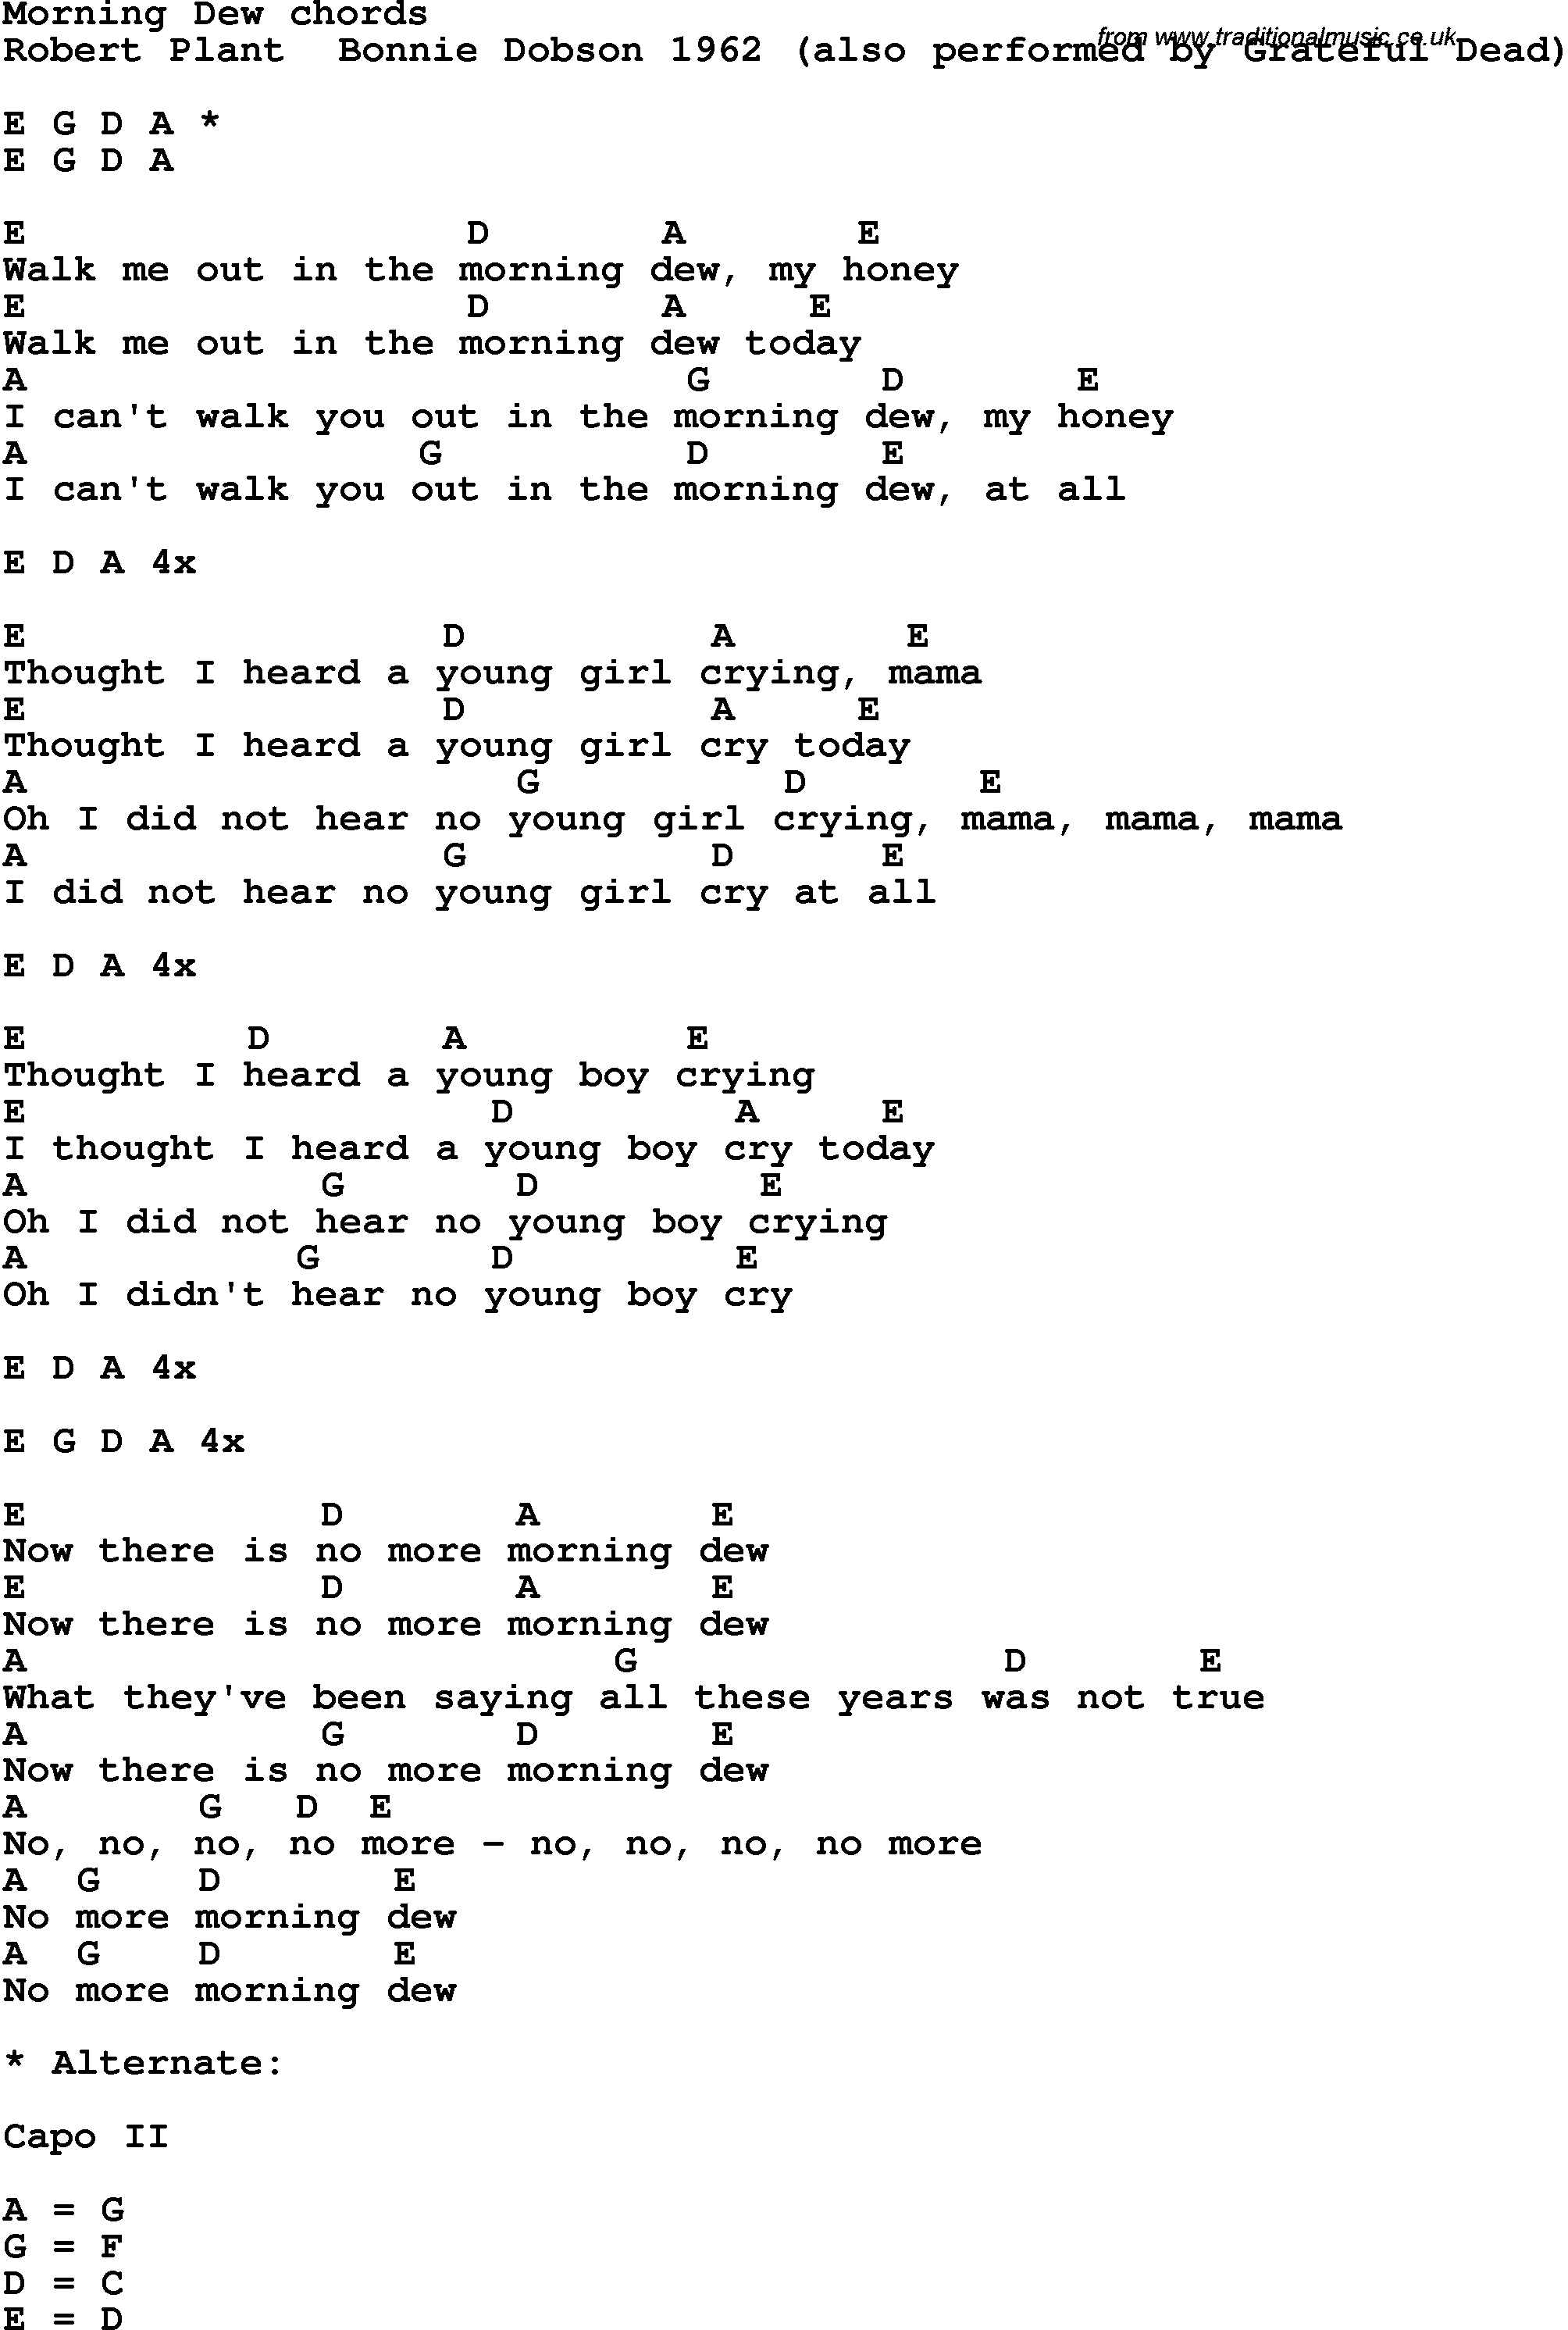 Song Lyrics with guitar chords for Morning Dew - Robert Plant